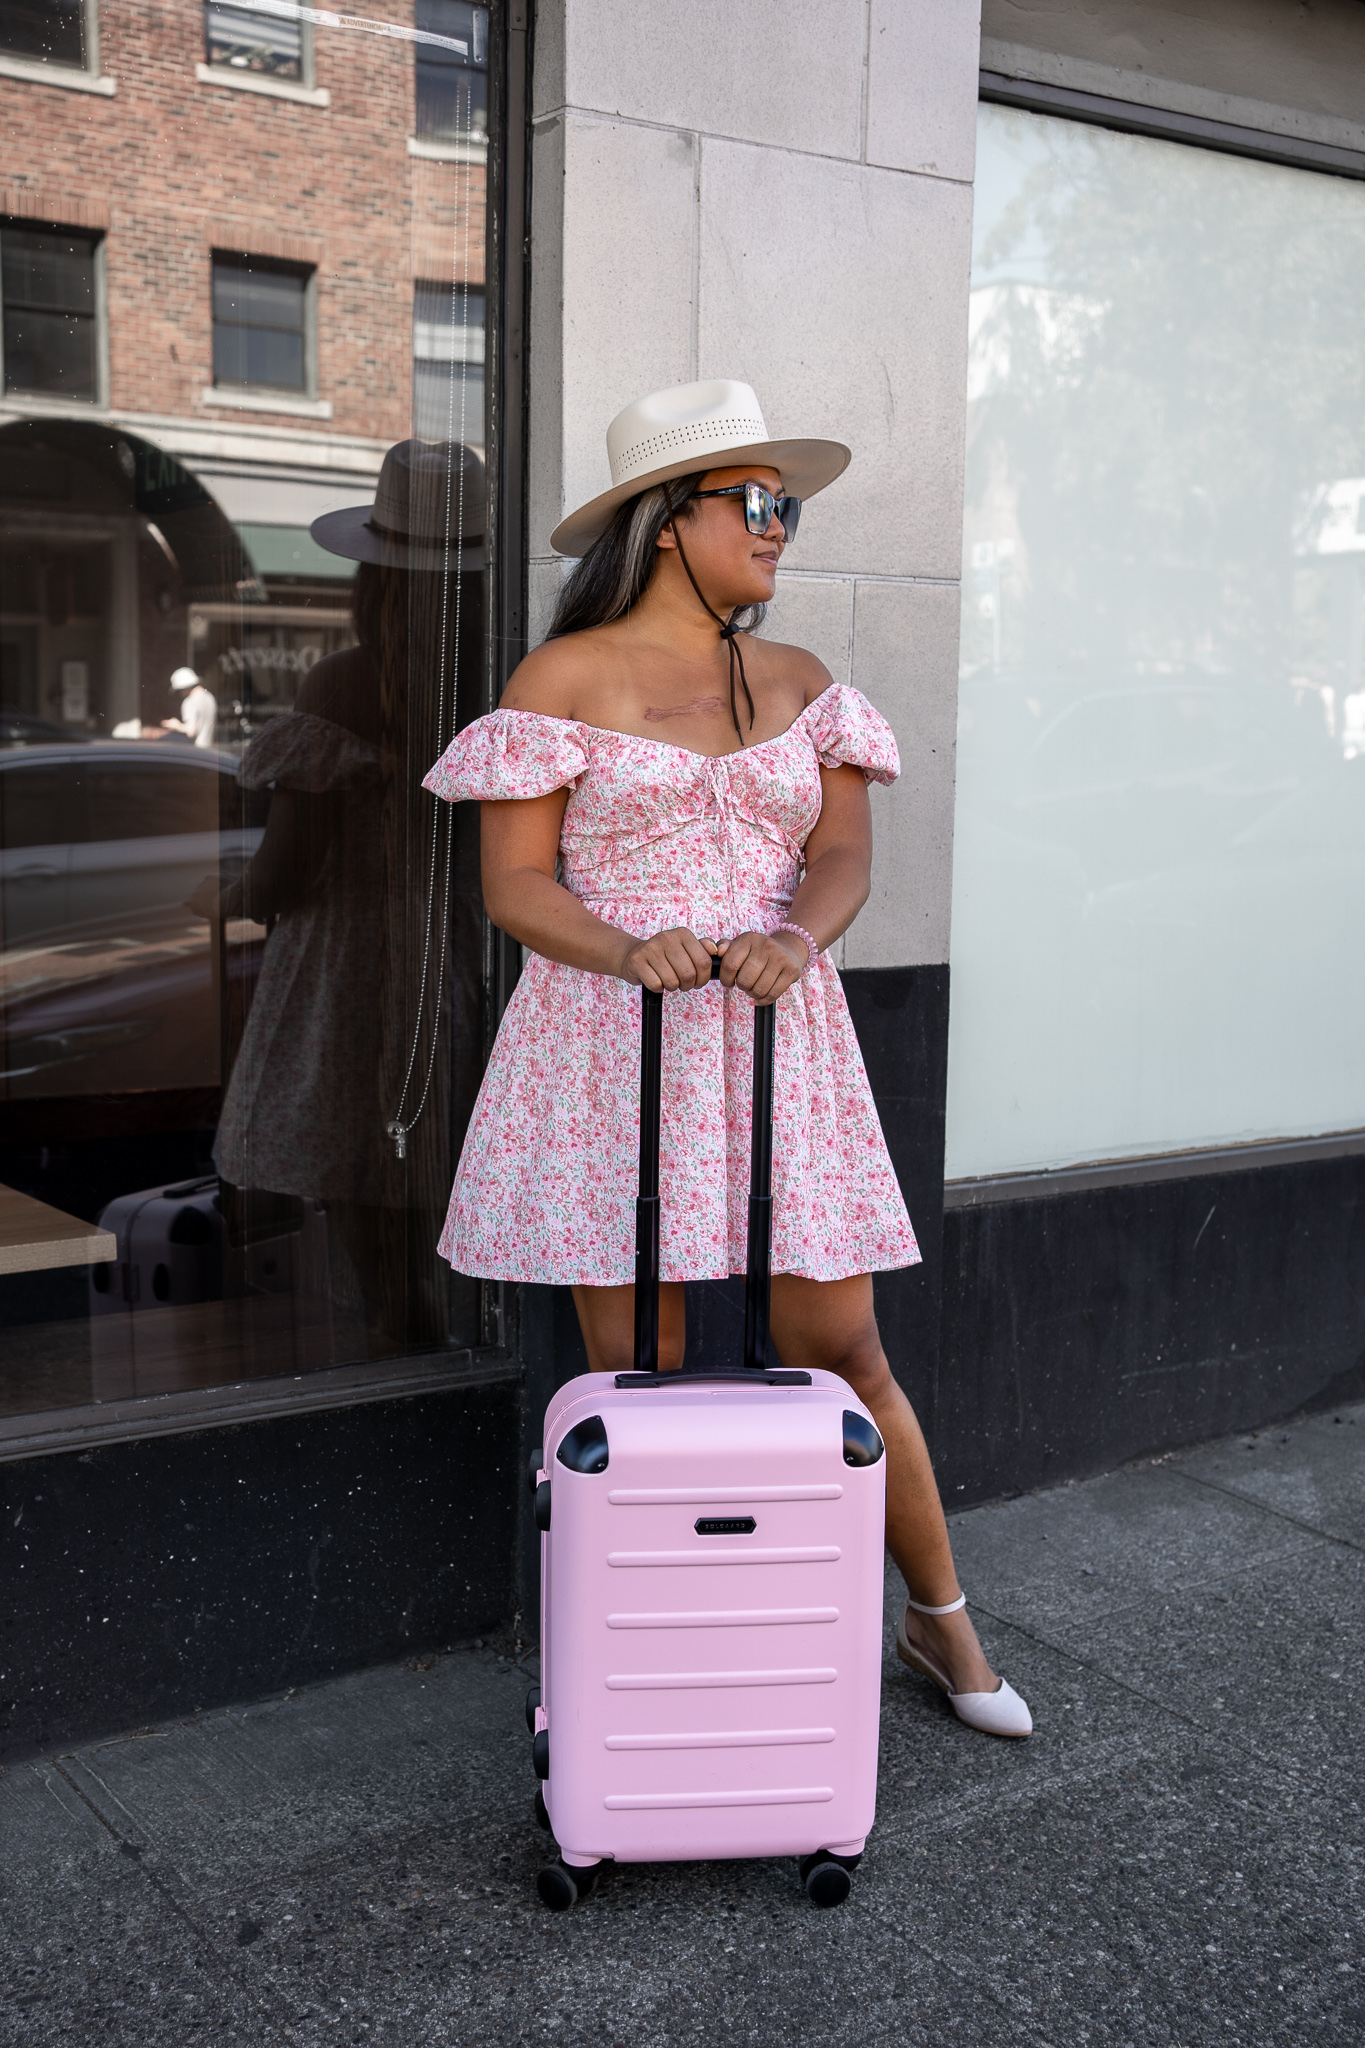 Solgaard Carry On Plus Luggage LAIT Gia Dress Viscata Montroig sandals American Hat Makers Barcelona Hat